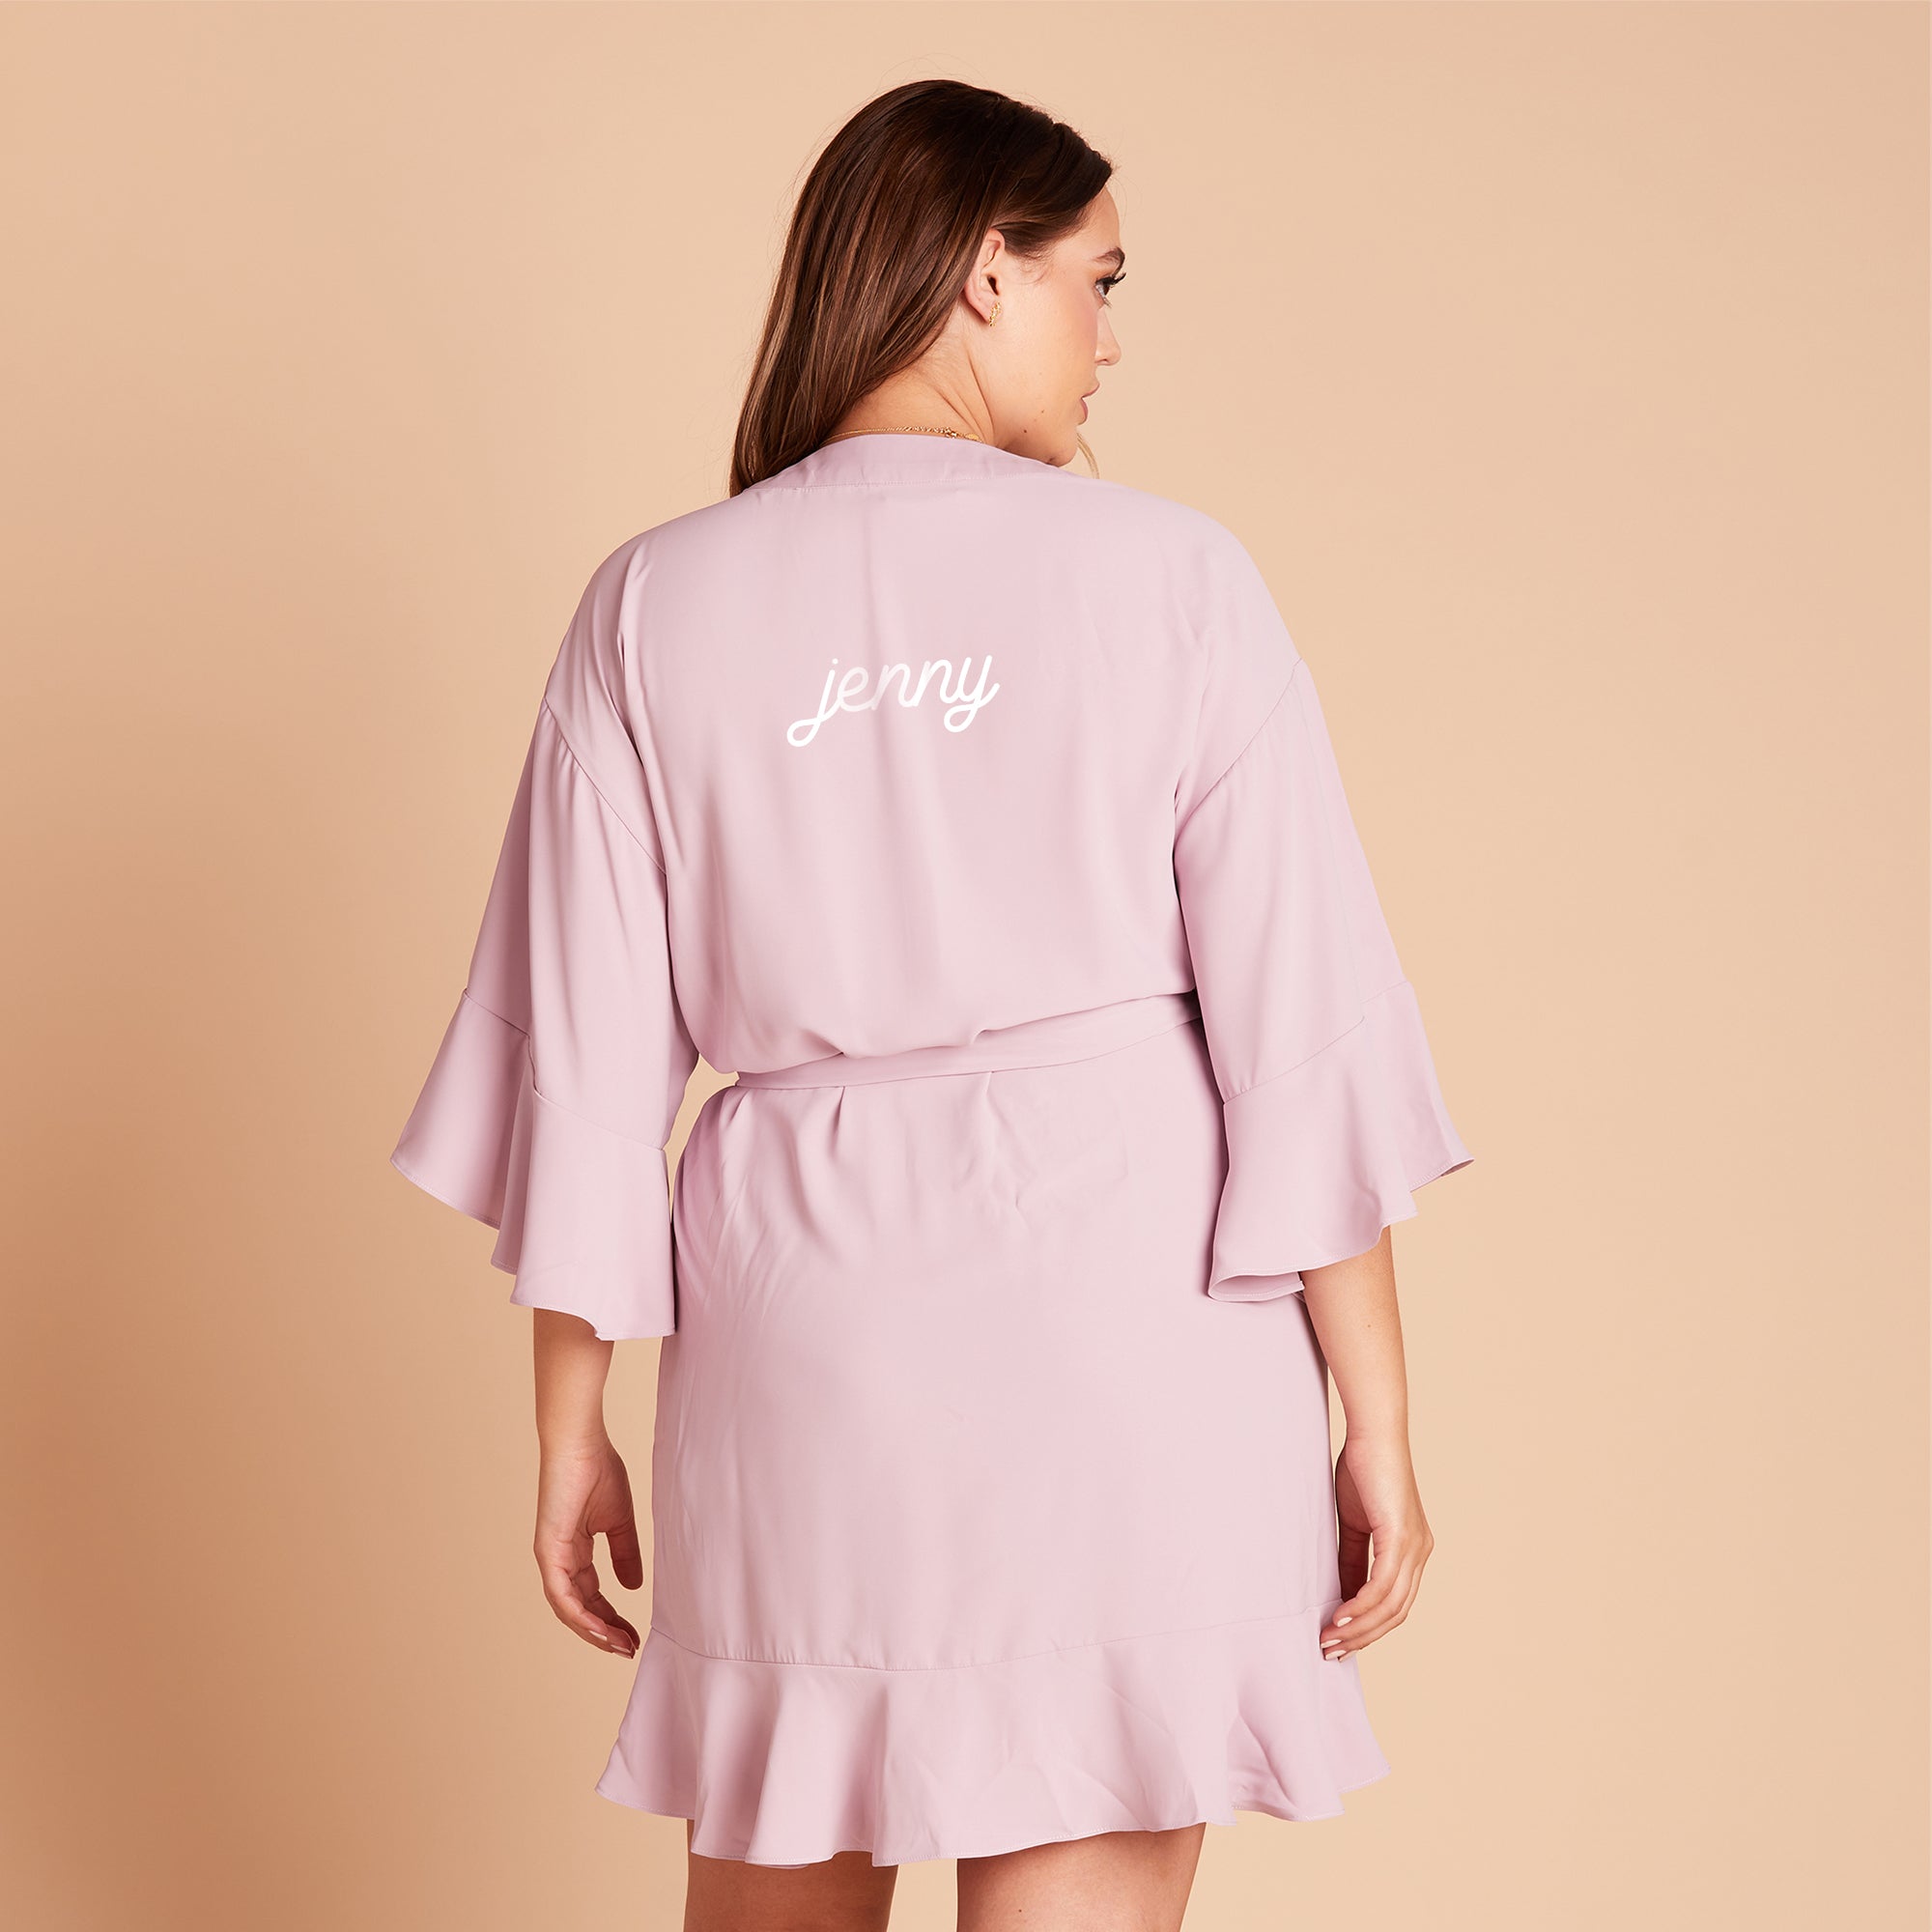 Kenny Ruffle Robe in lavender by Birdy Grey, back view